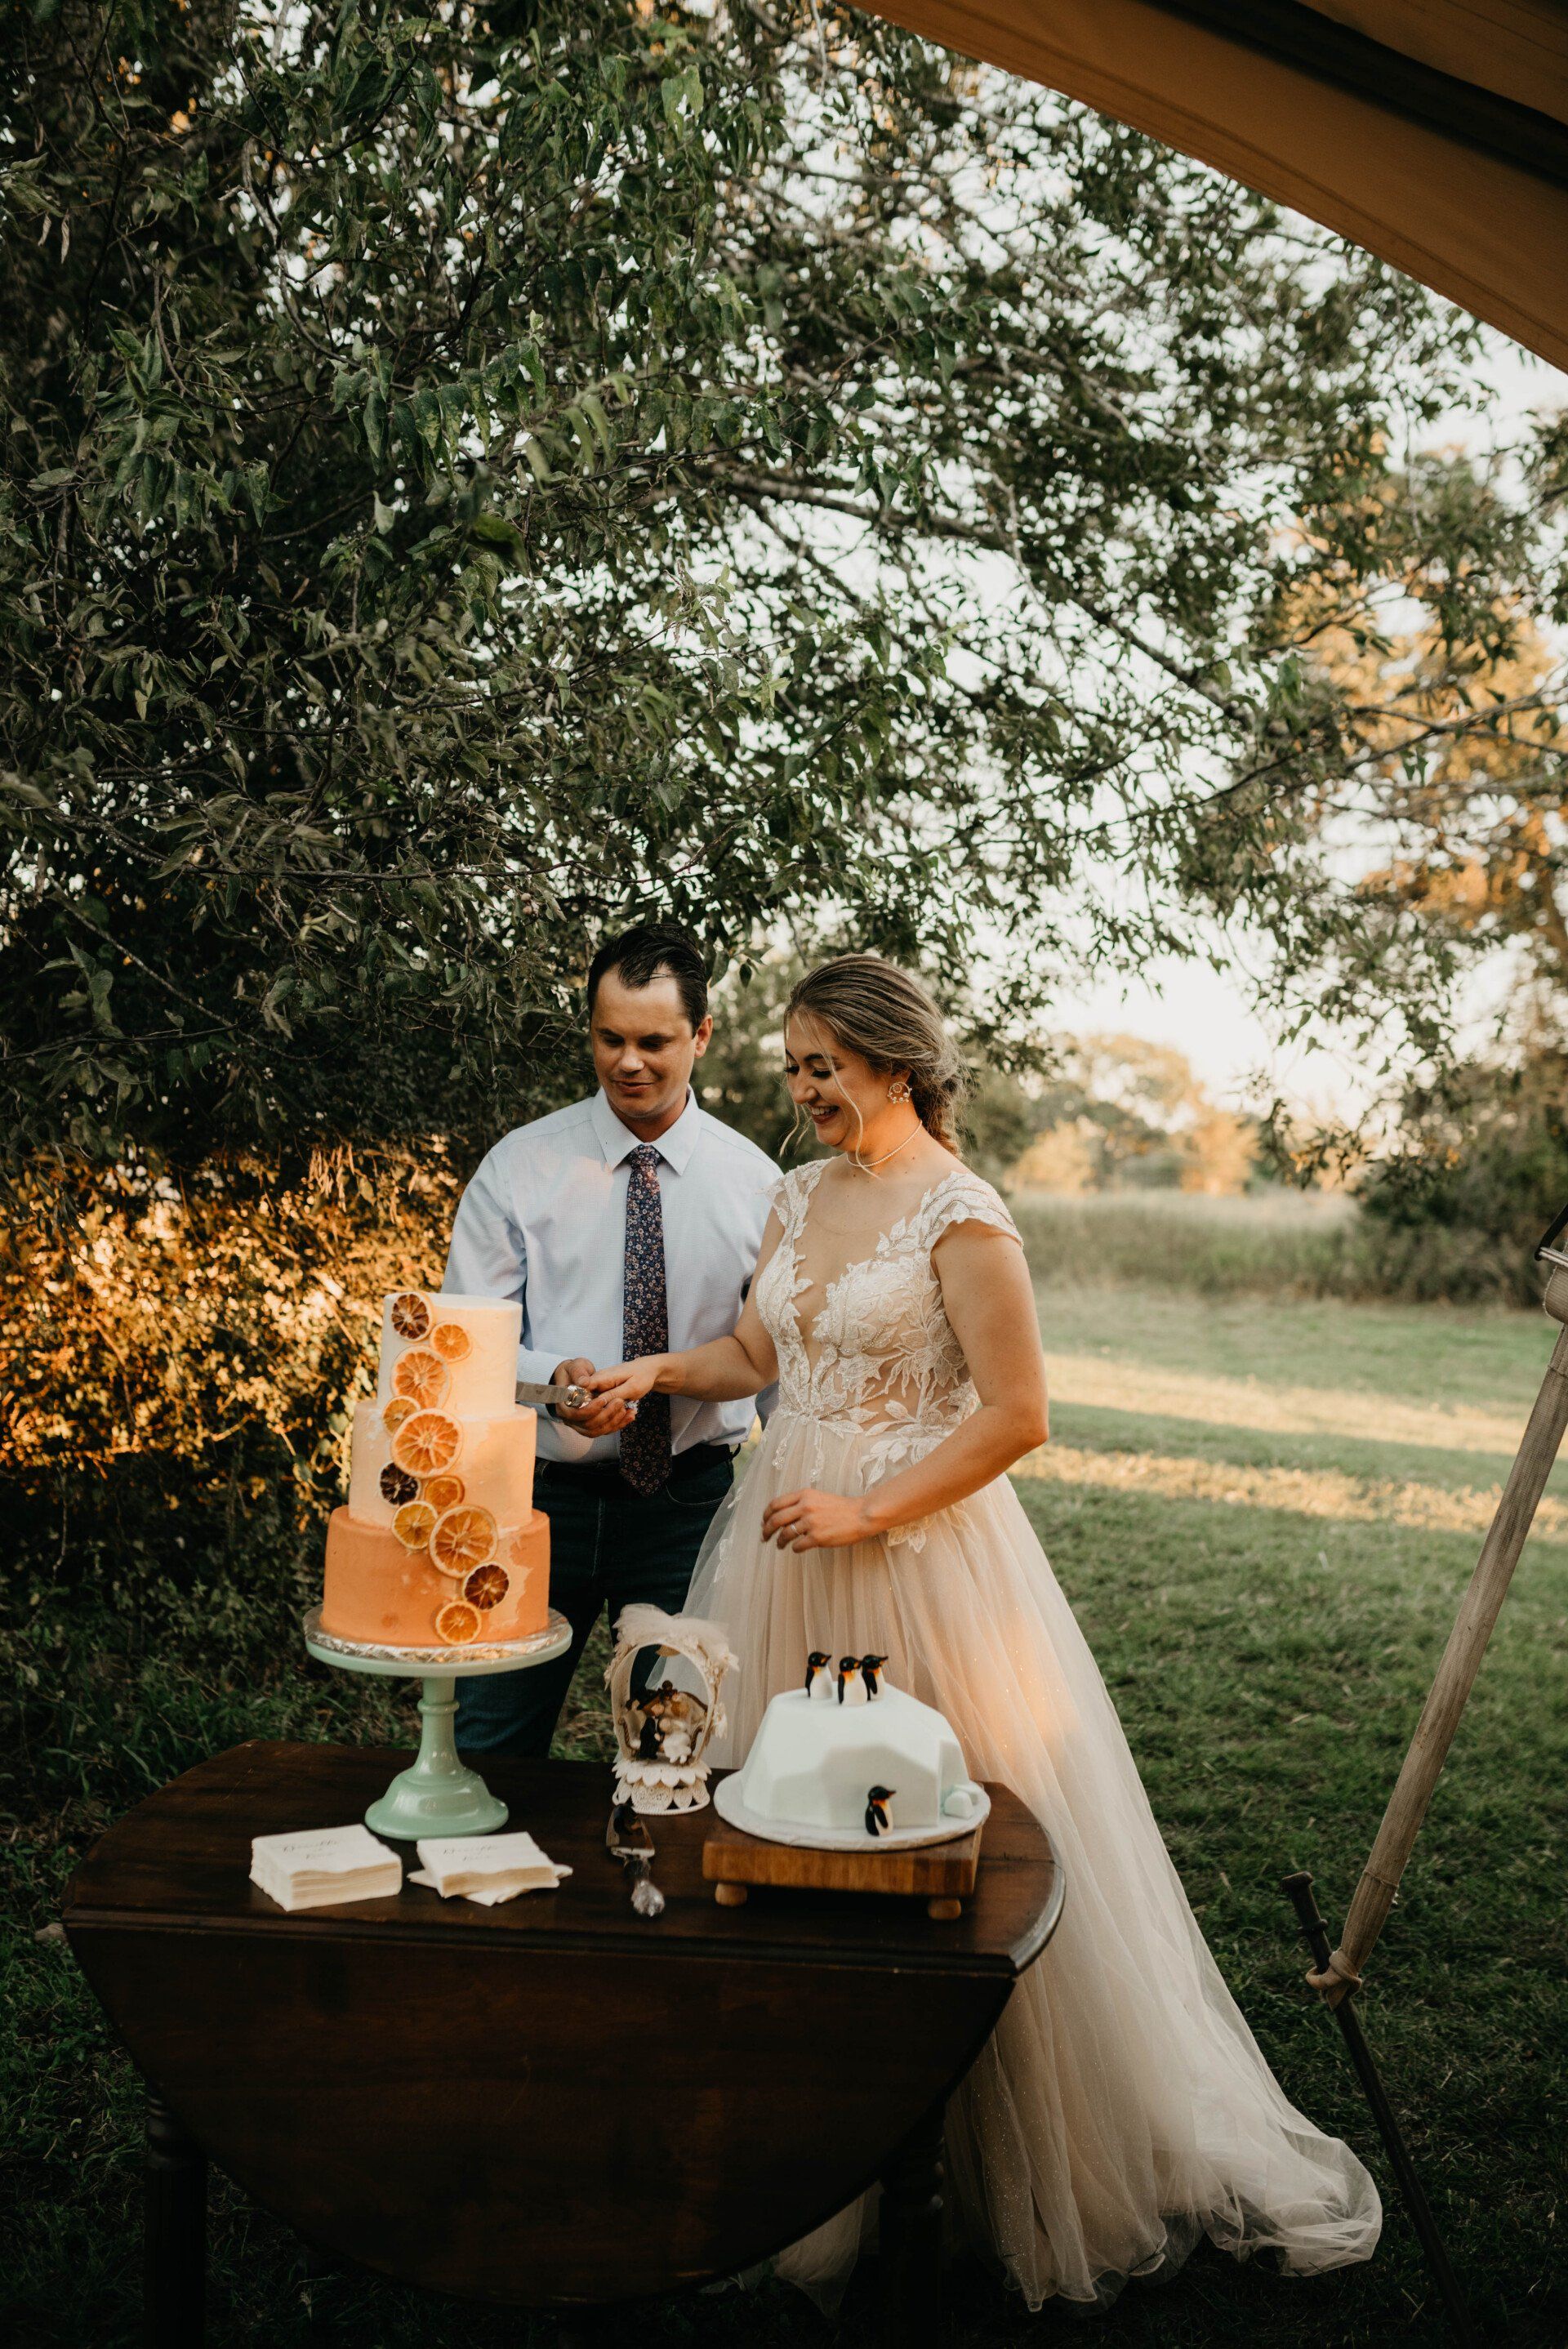 a bride and groom cutting their wedding cake outside